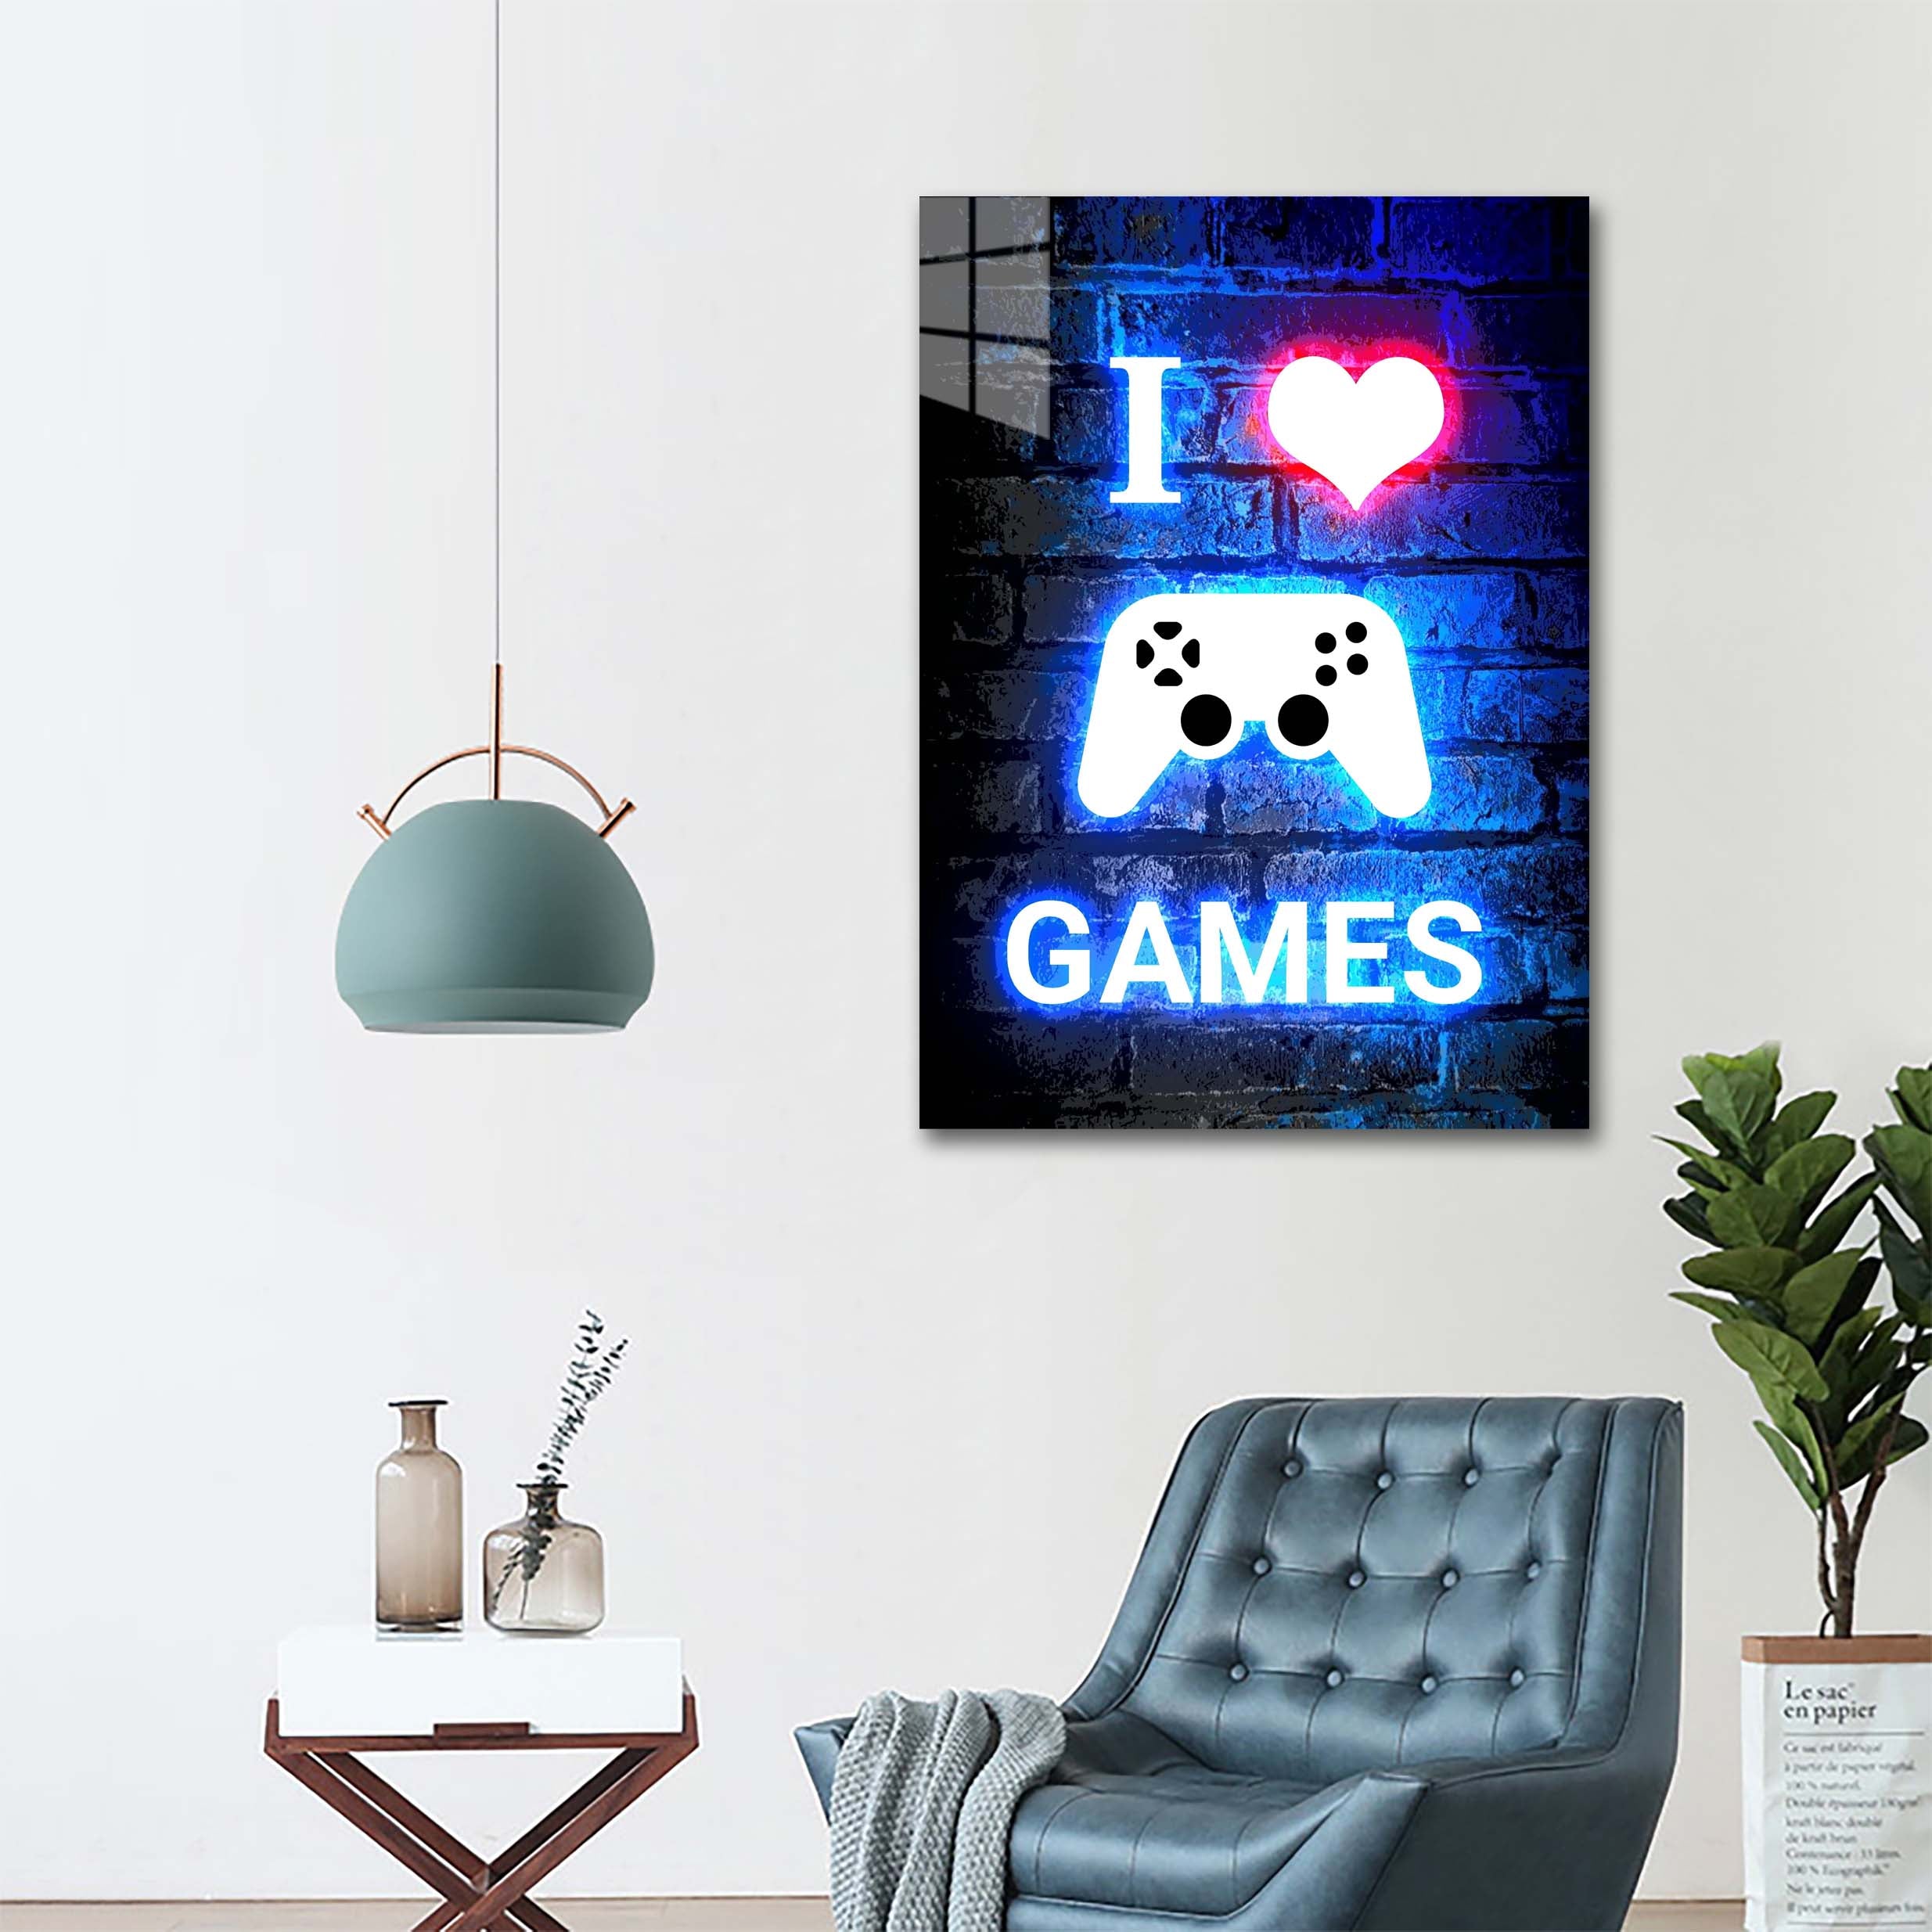 Games -designed by @Dayo Art